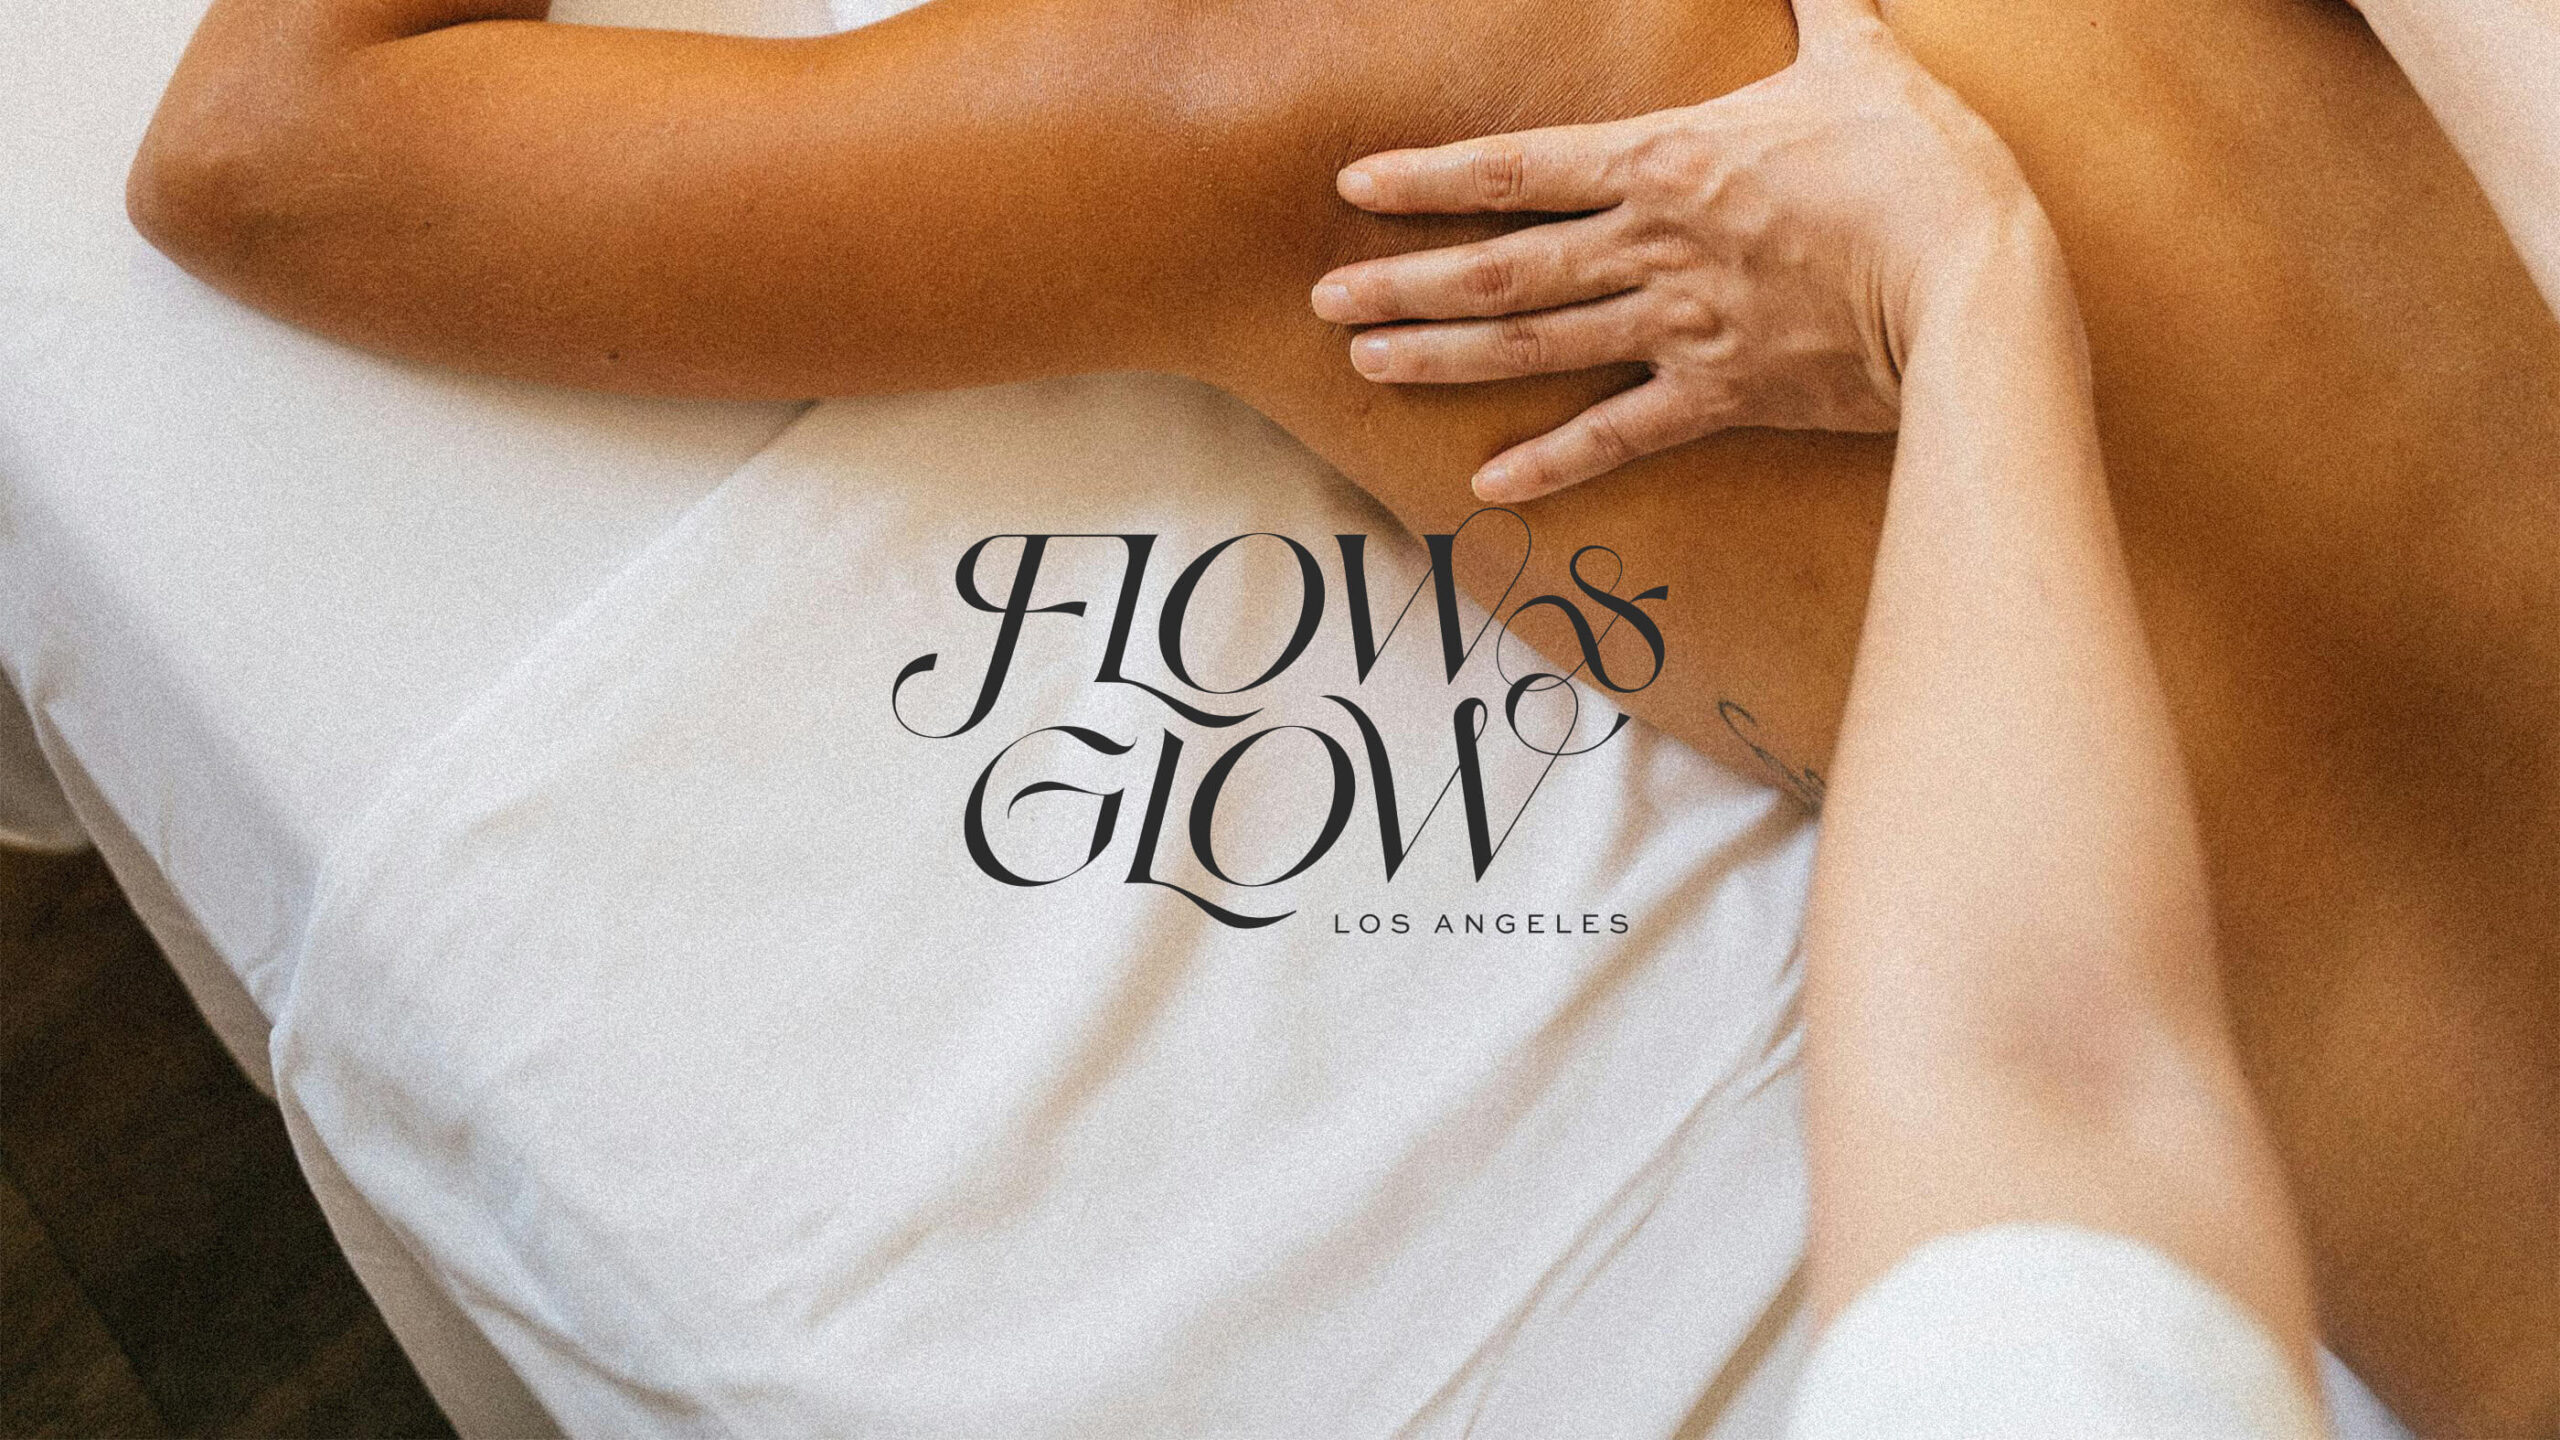 flow and glow la, holistic wellness and massage specialist brand design and logo design